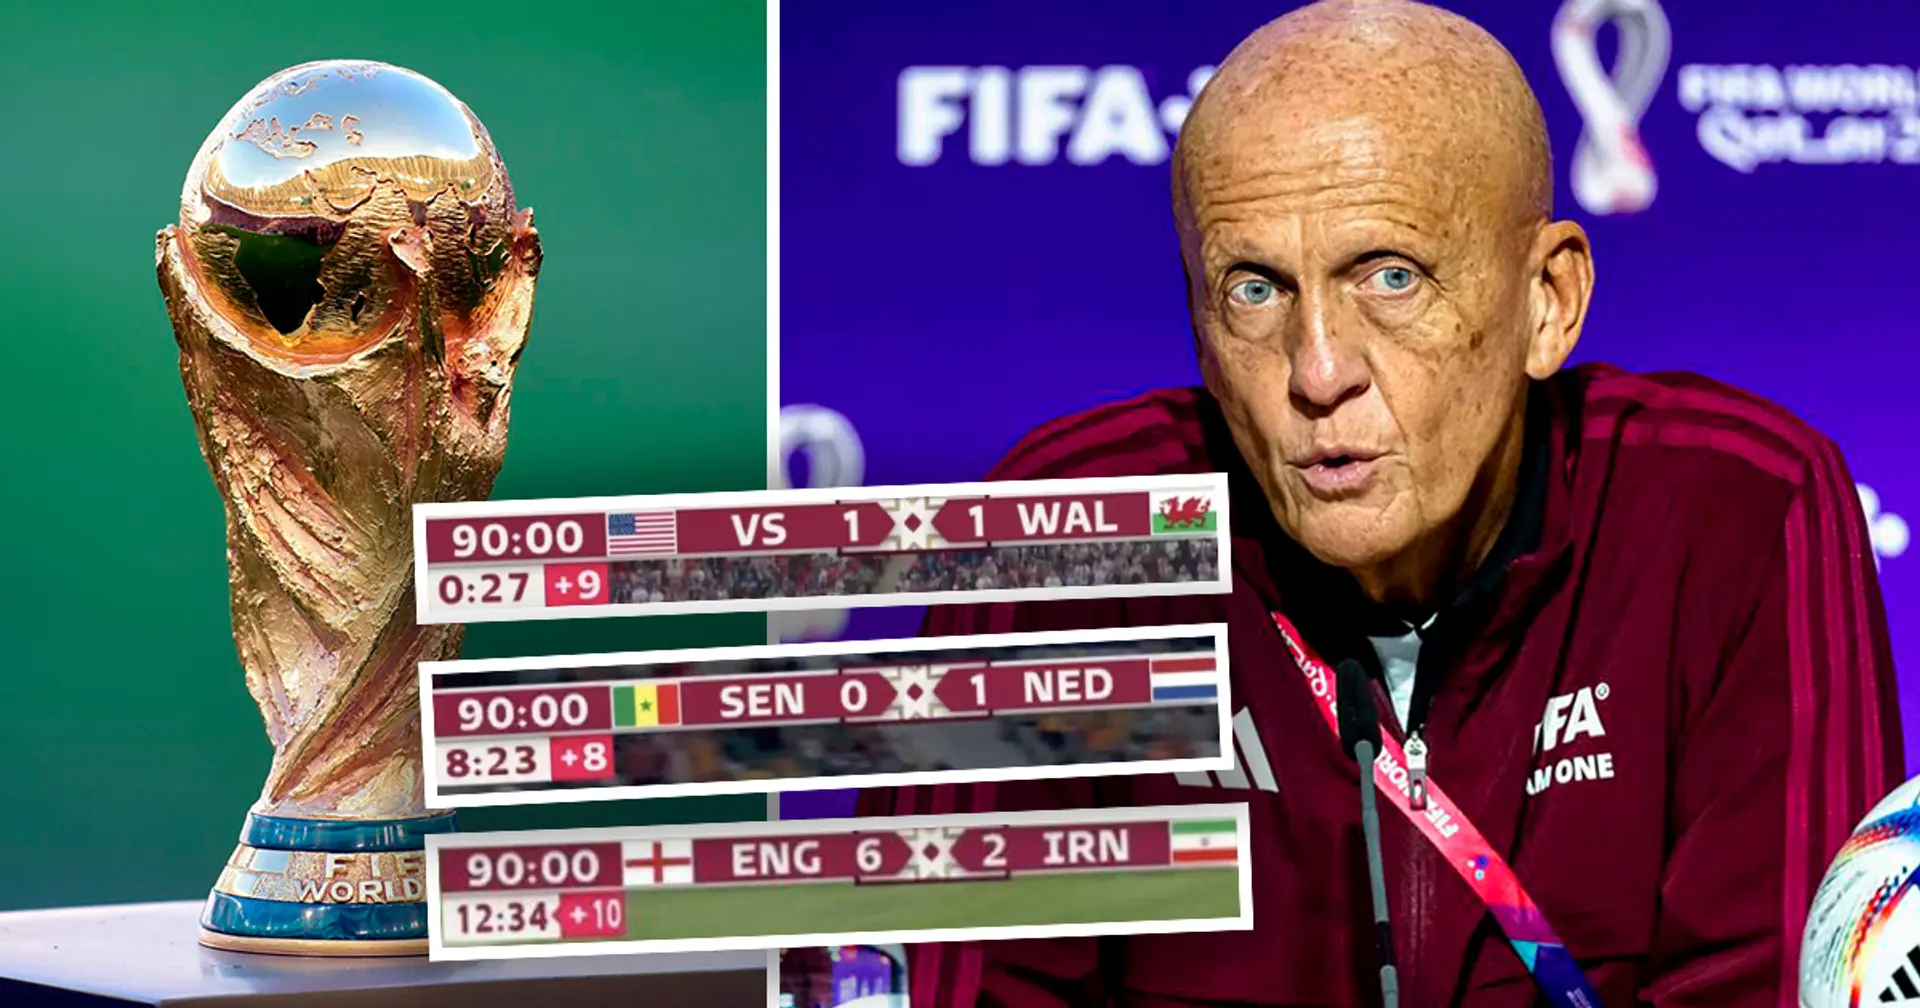 Why is there so much added time at the World Cup? Legendary referee Pierluigi Collina explains